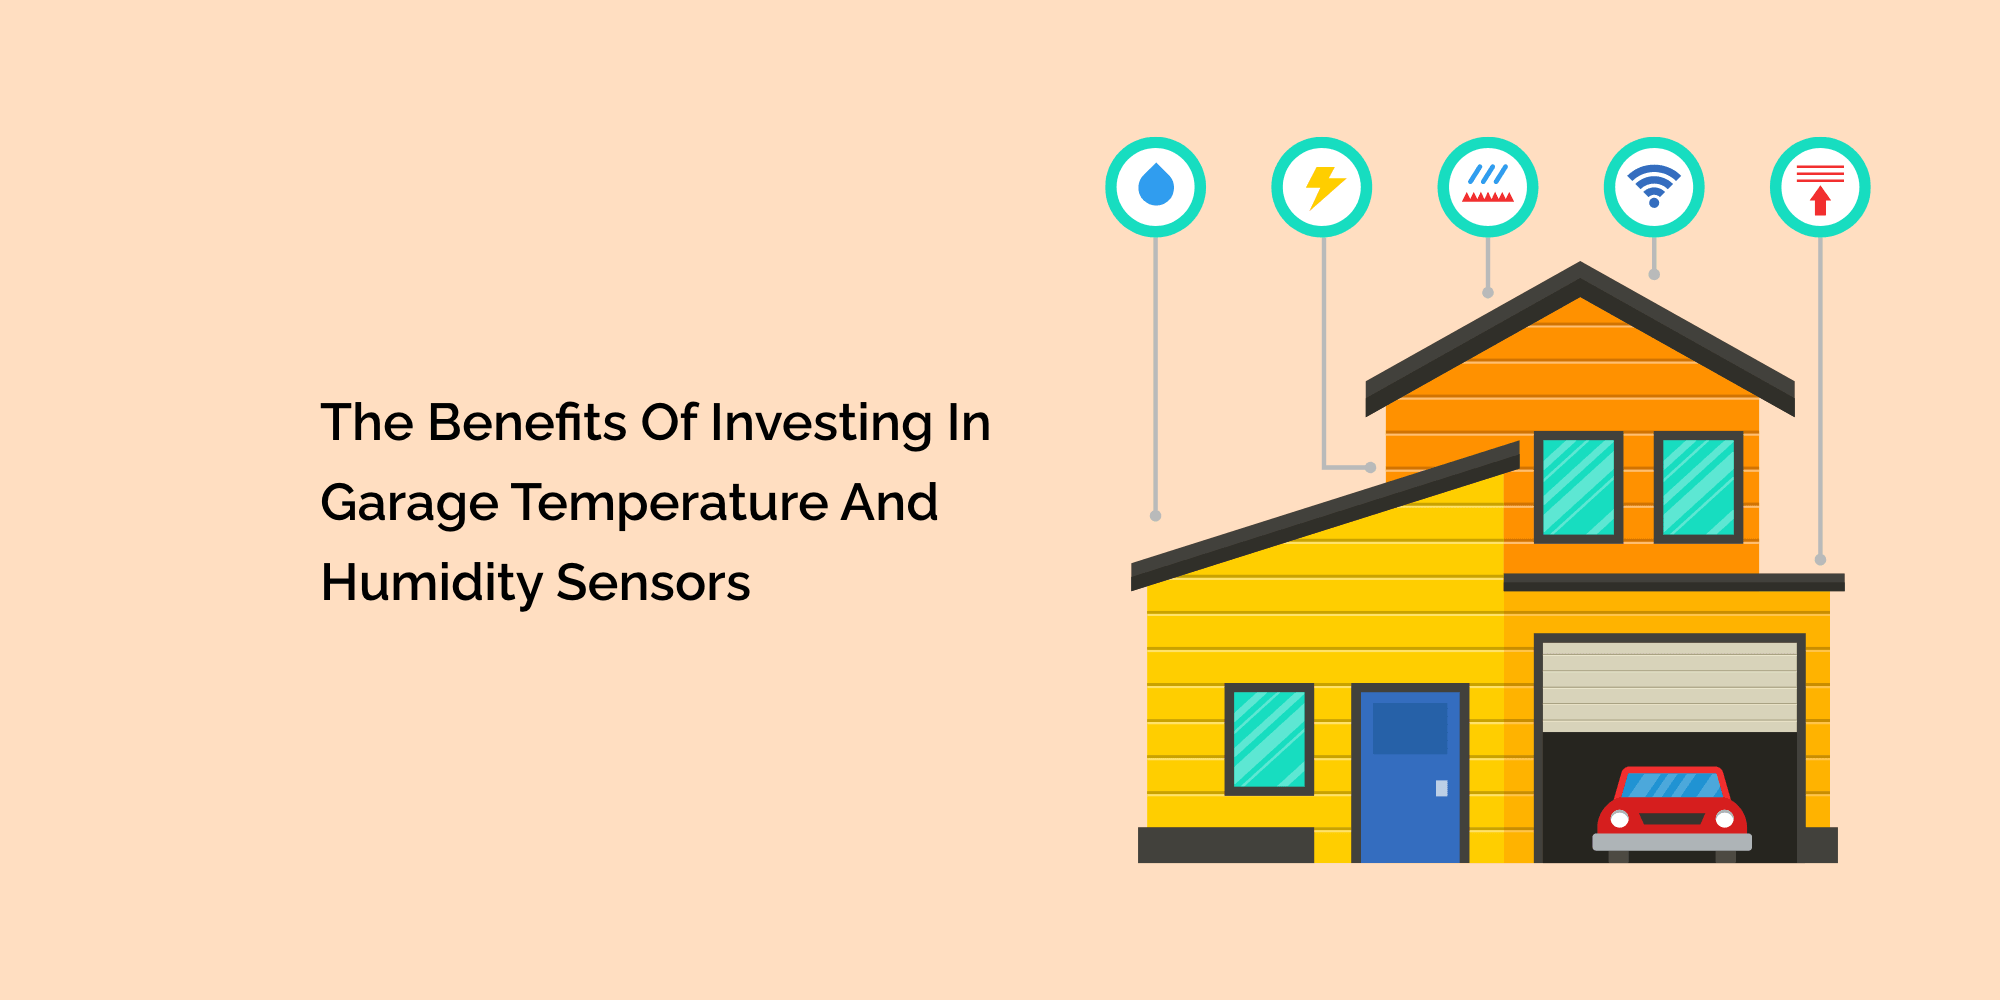 The Benefits of Investing in Garage Temperature and Humidity Sensors